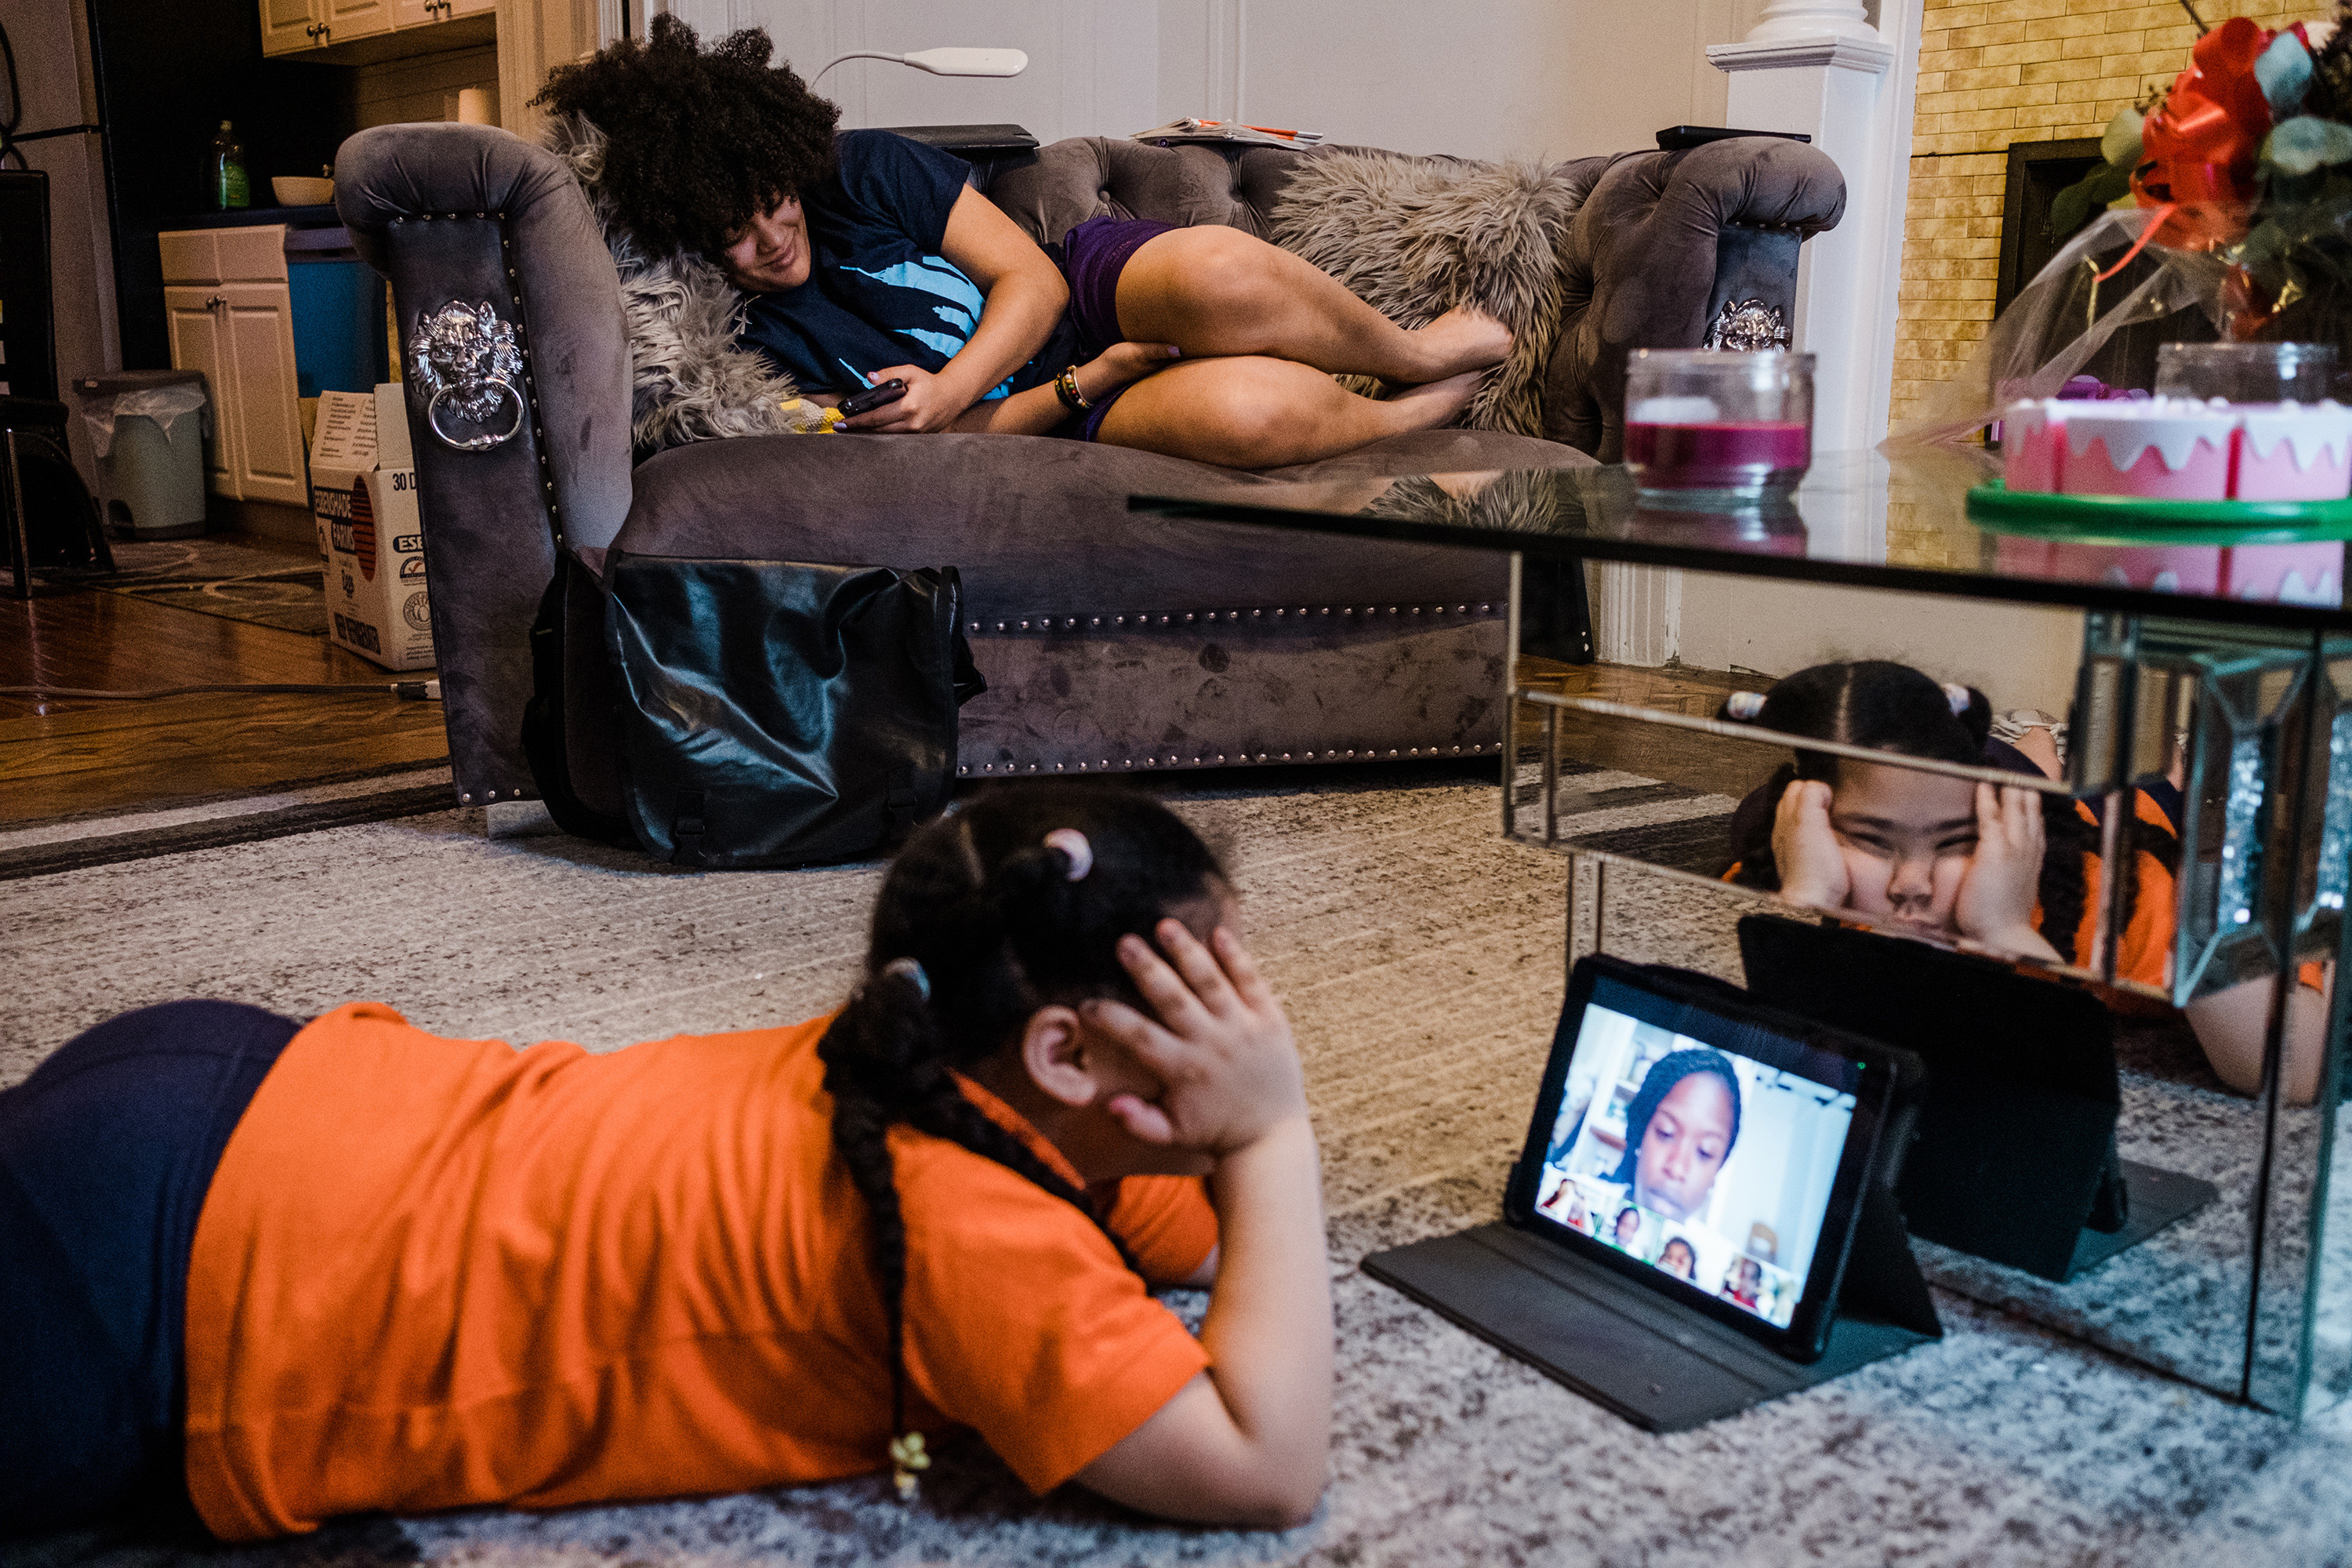 A girl lies on the ground looking at an iPad screen while her sister lies on the couch behind her